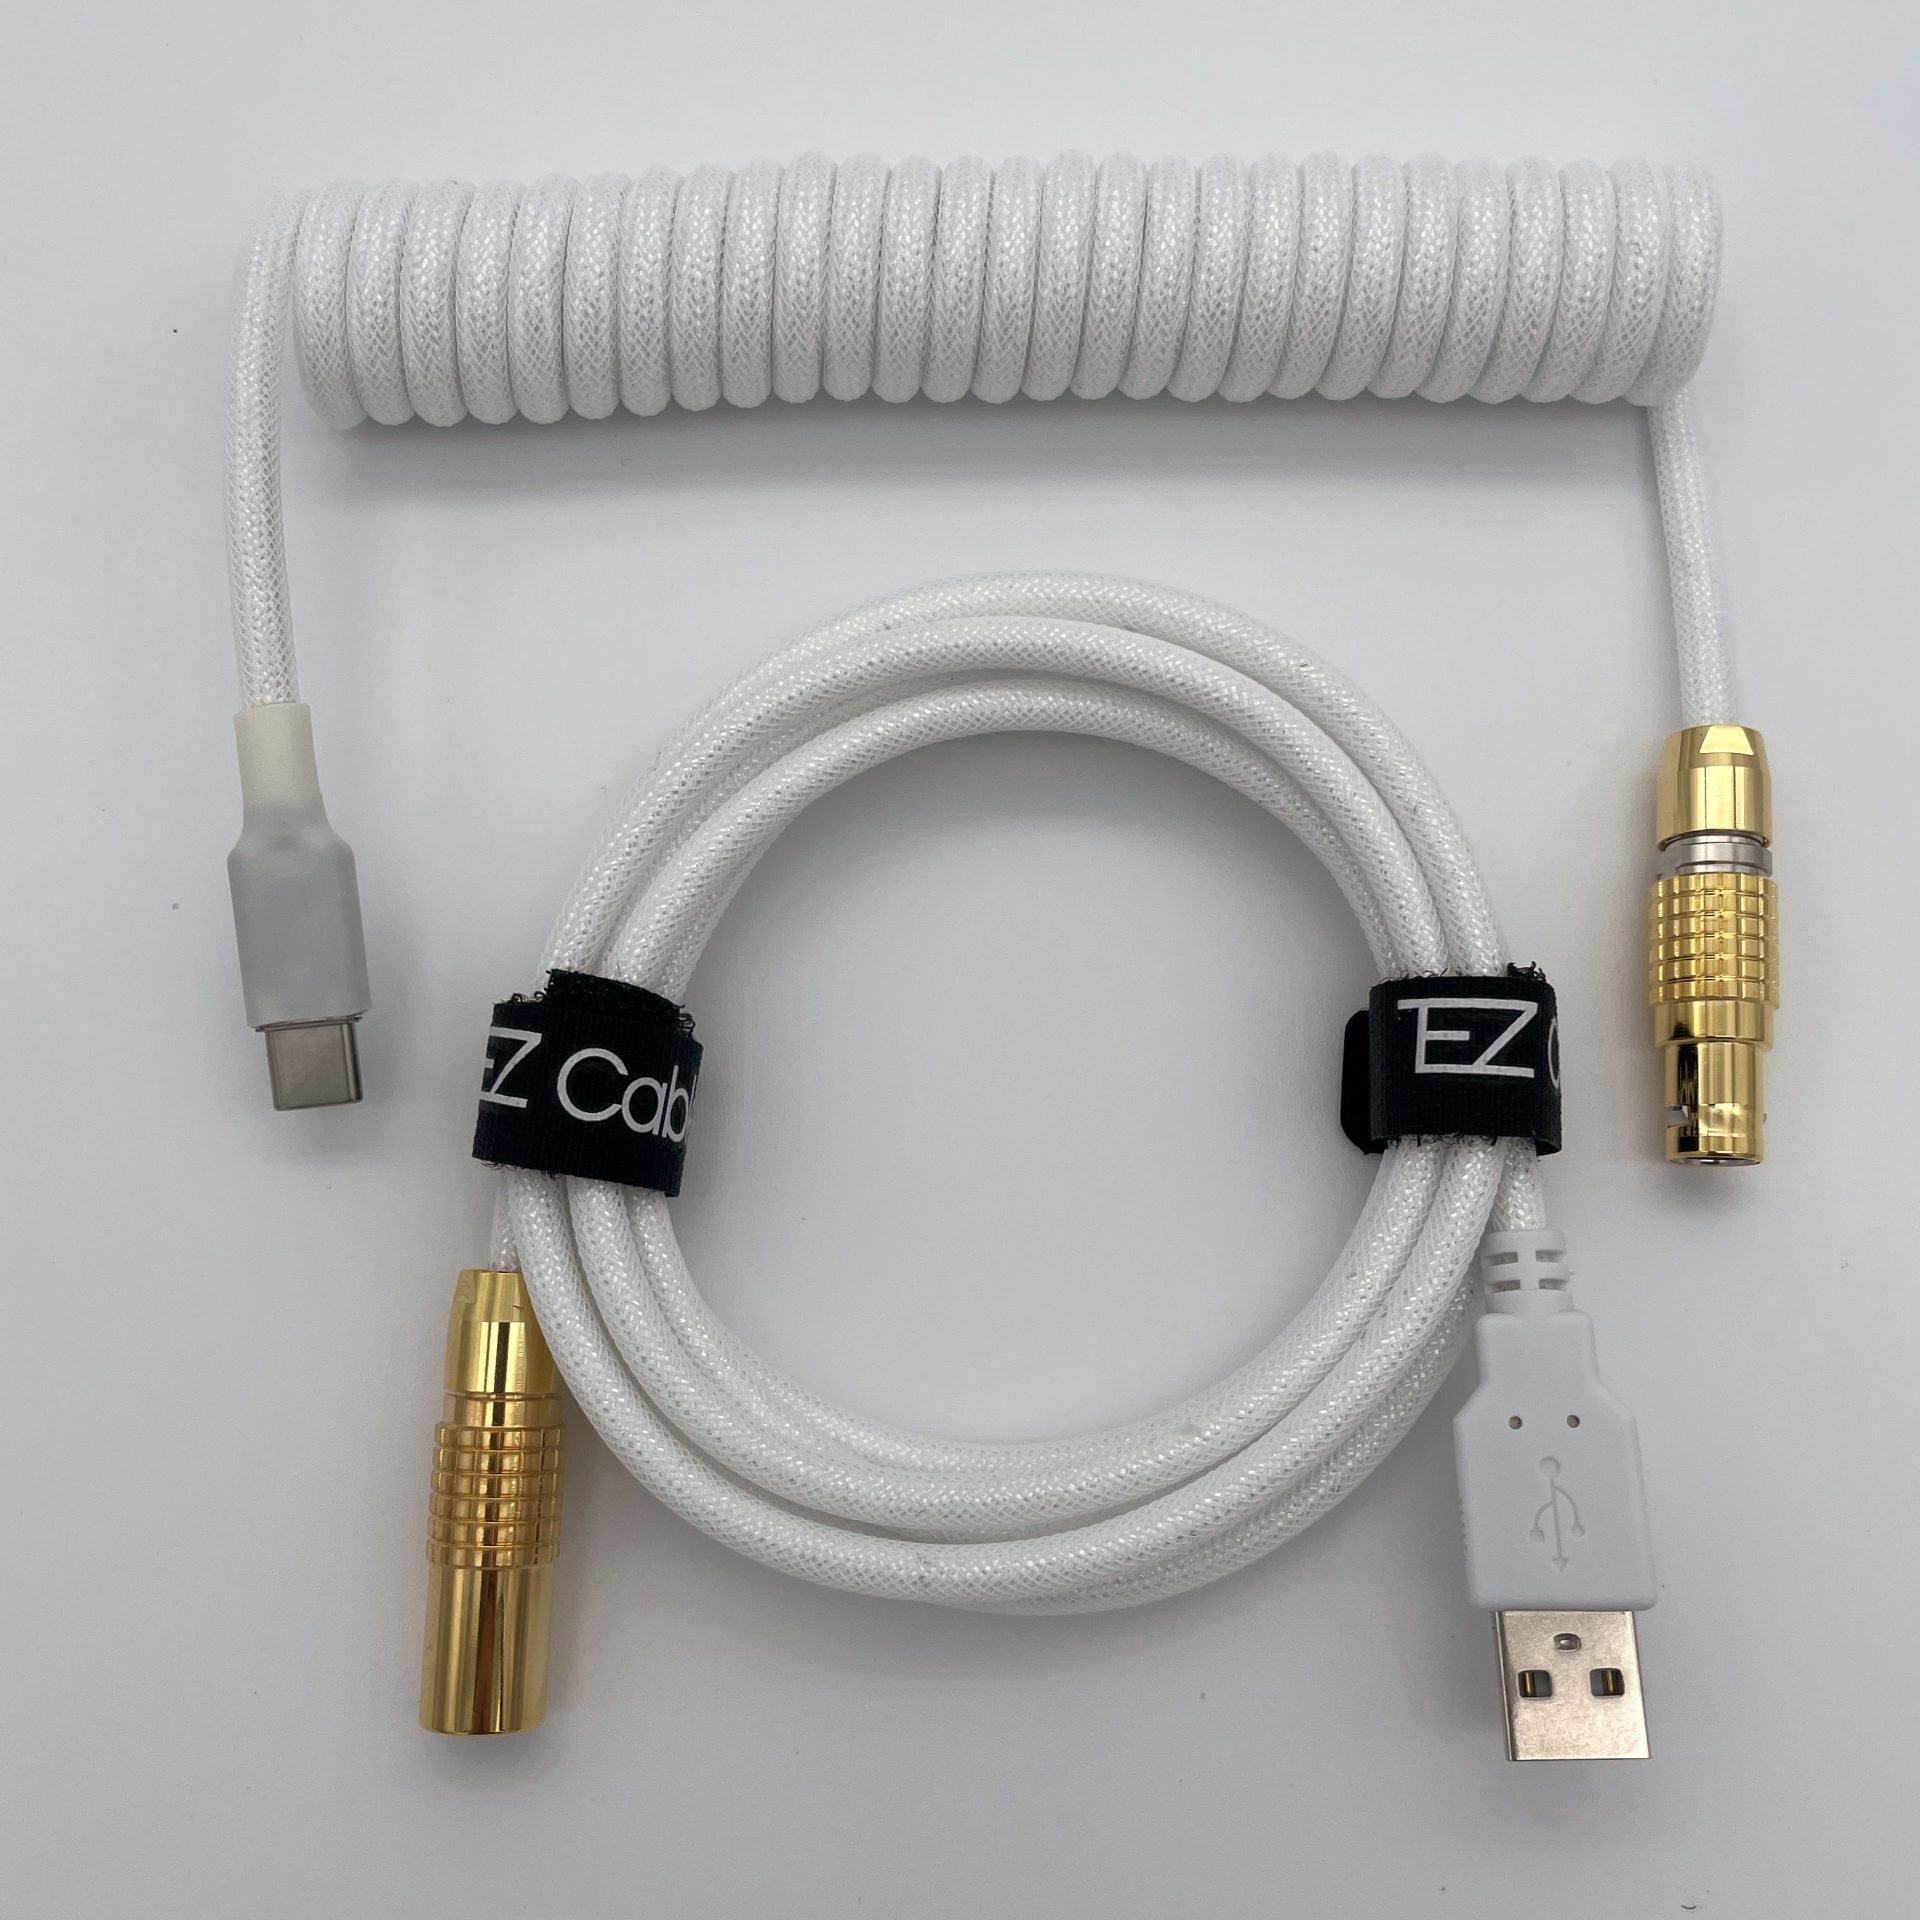 Coiled Keyboard Cables - Tez Cables Best Premade Coiled Cables for